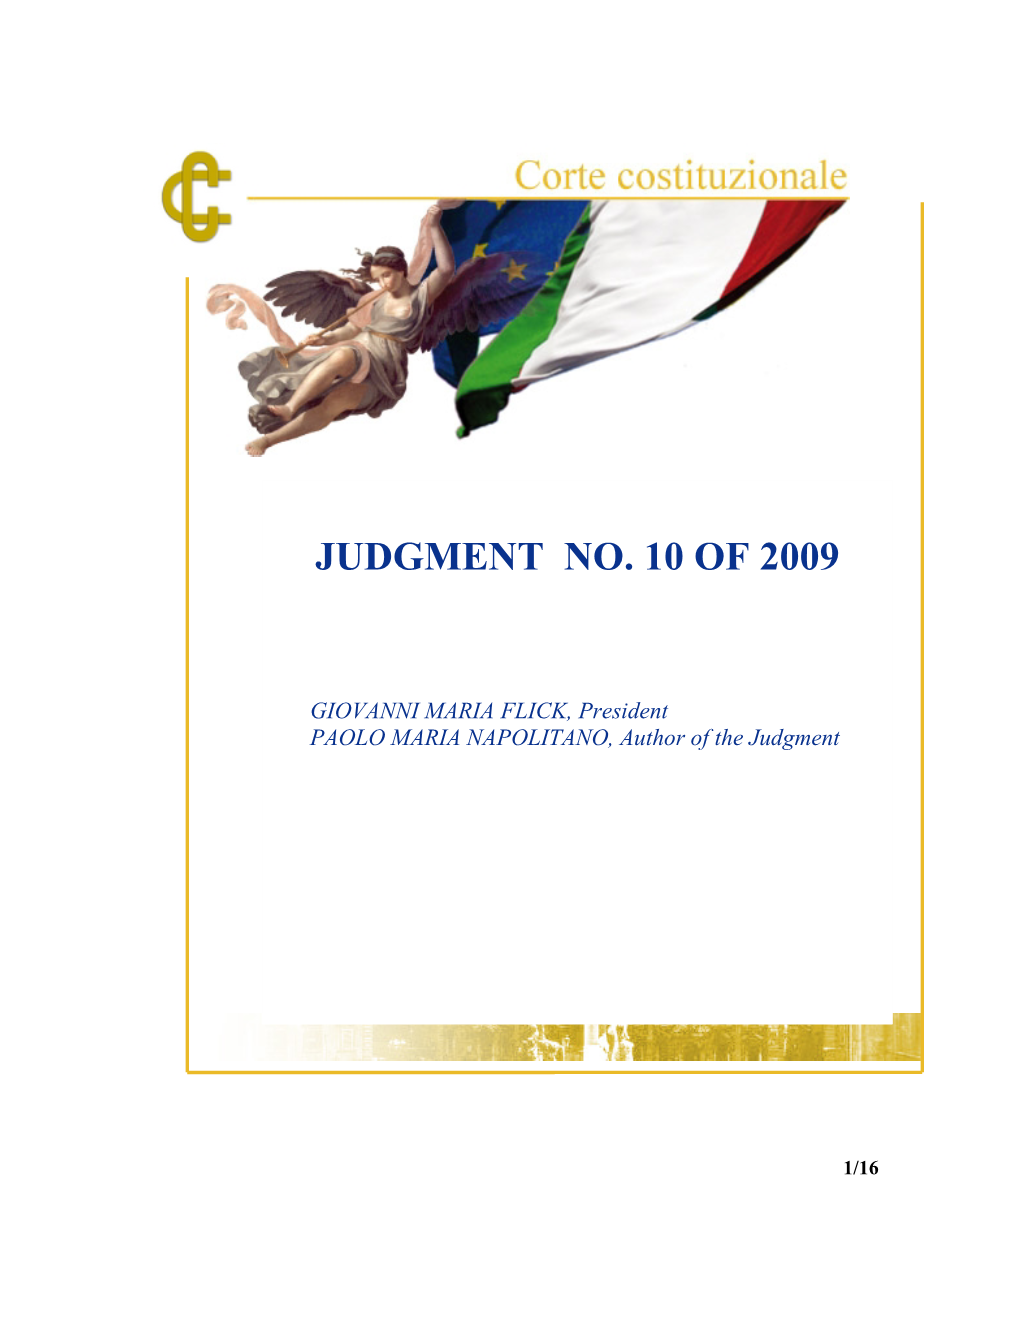 Judgment No. 10 of 2009